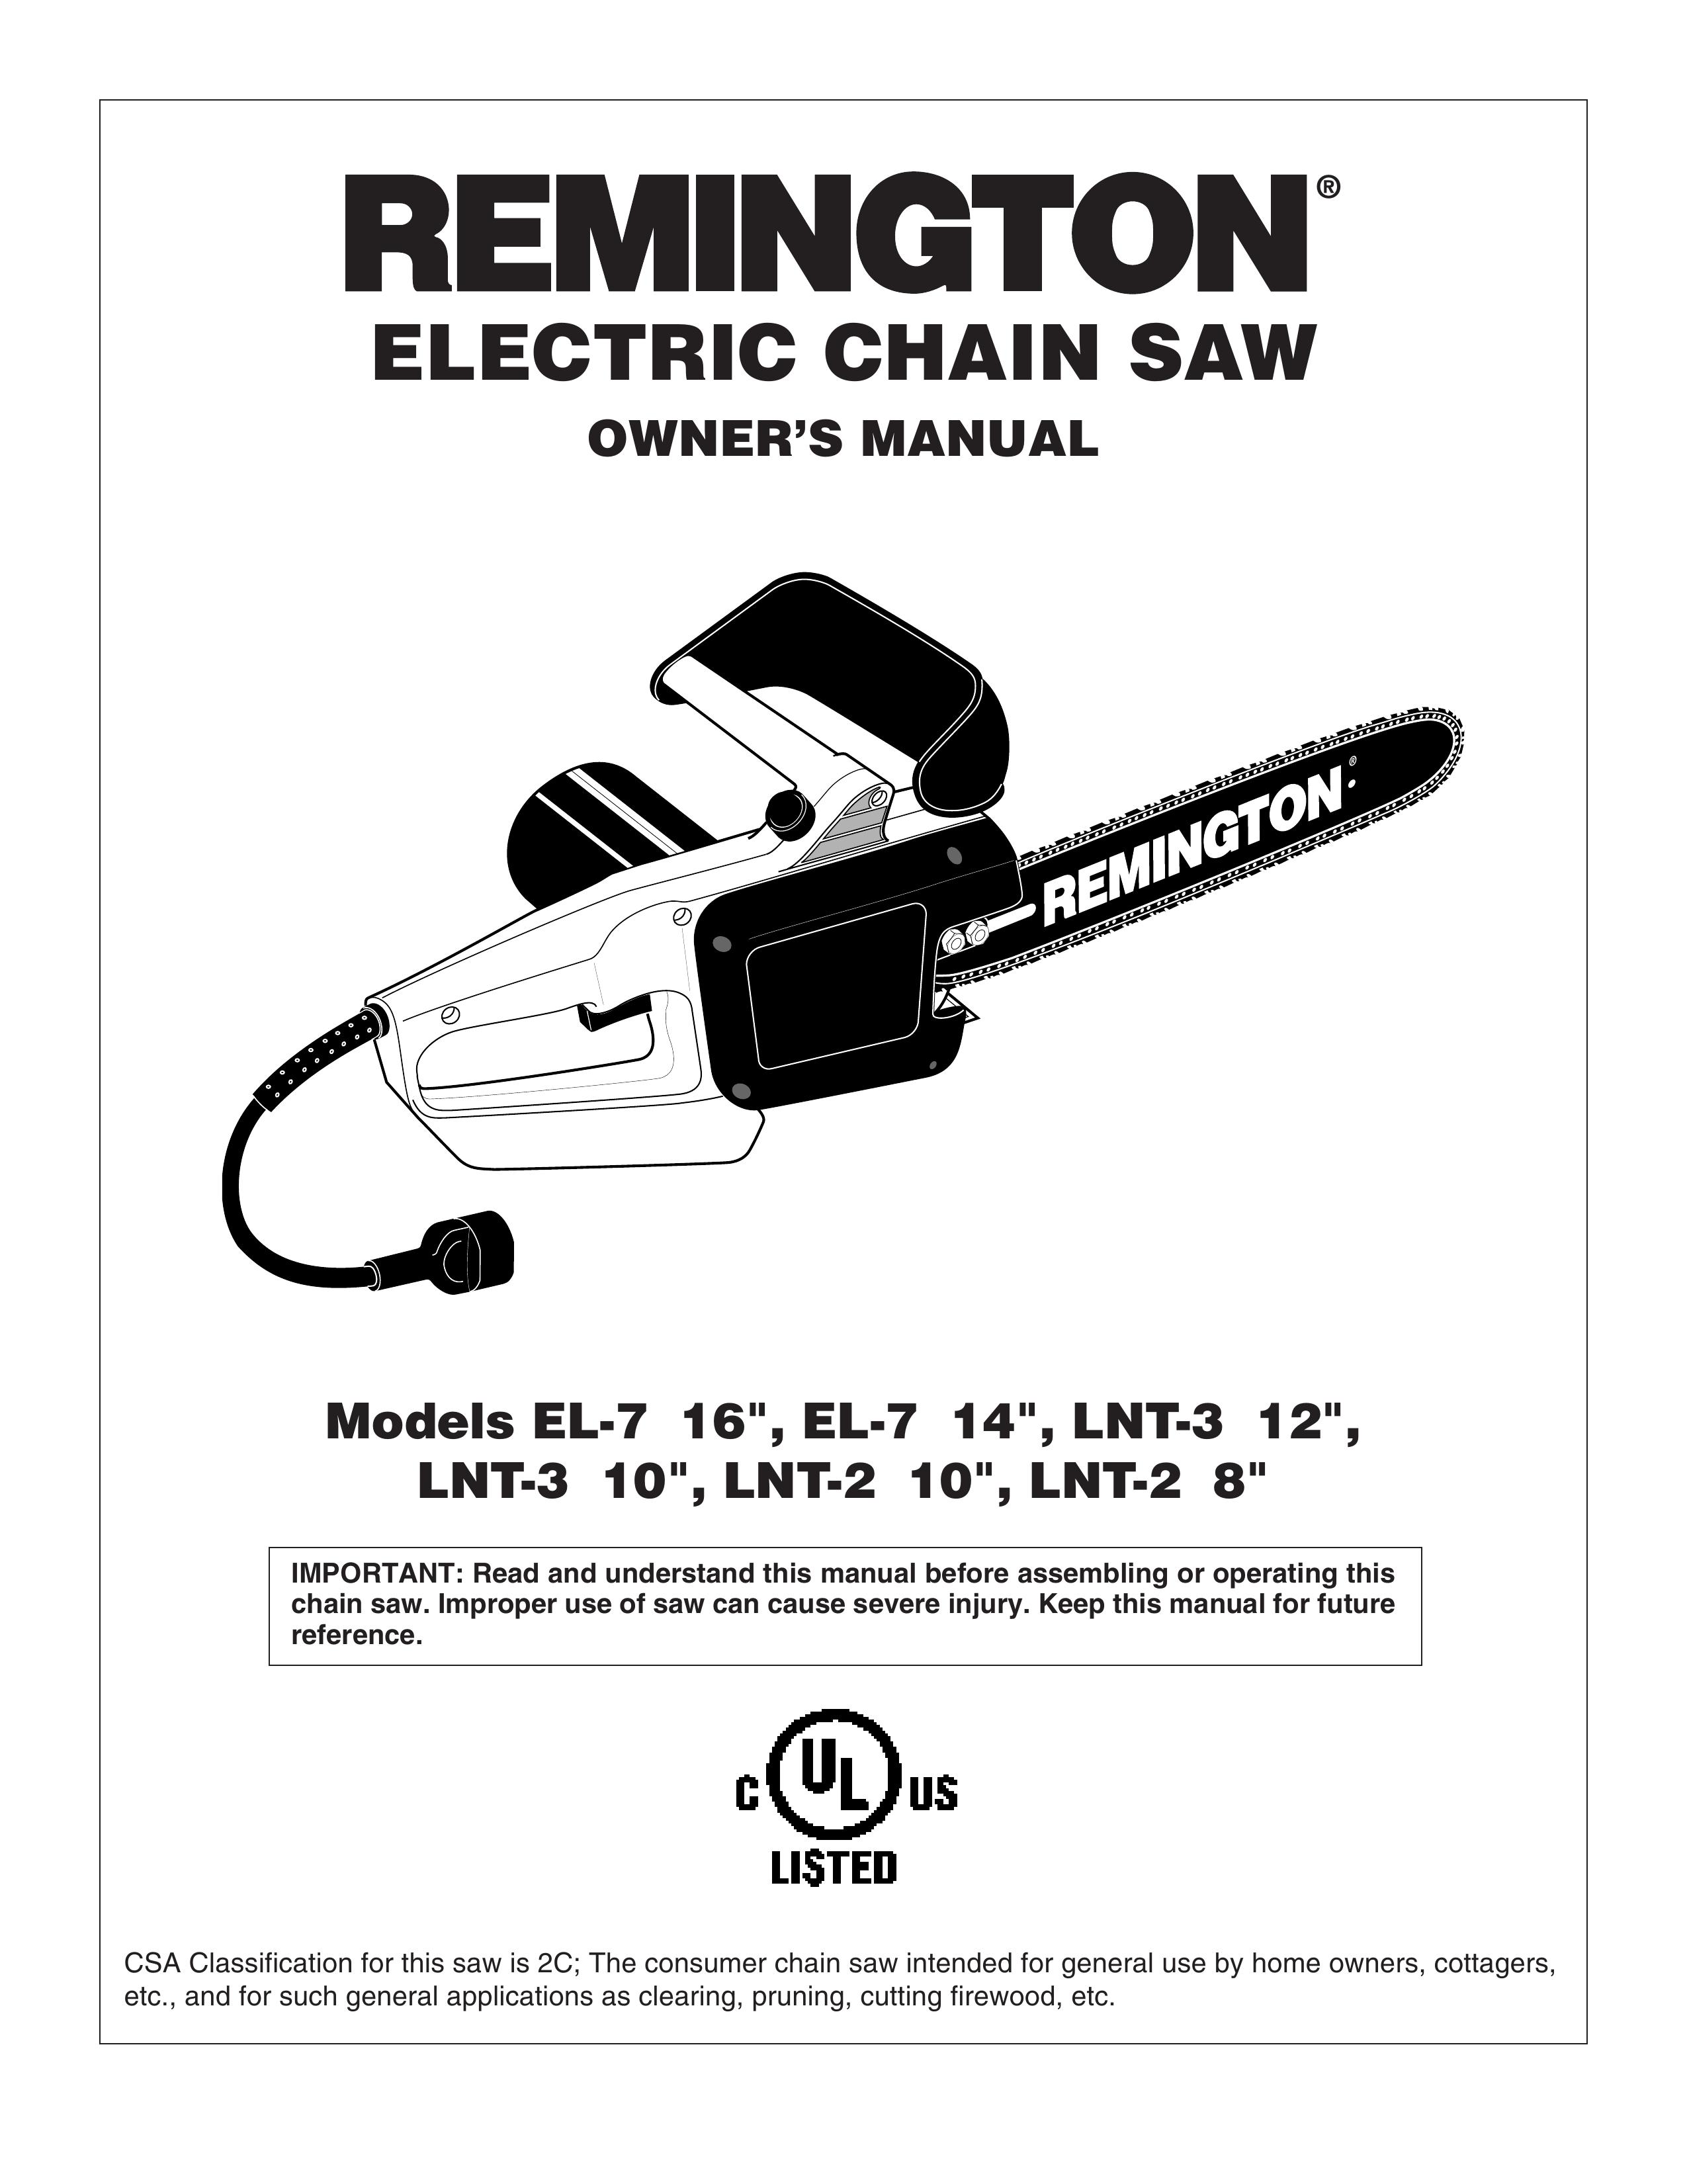 Remington EL-7 16-inch, EL-7 14-inch, LNT-3 12-inch, LNT-3 10-inch, LNT-2 10-inch, LNT-2 8-inch Chainsaw User Manual